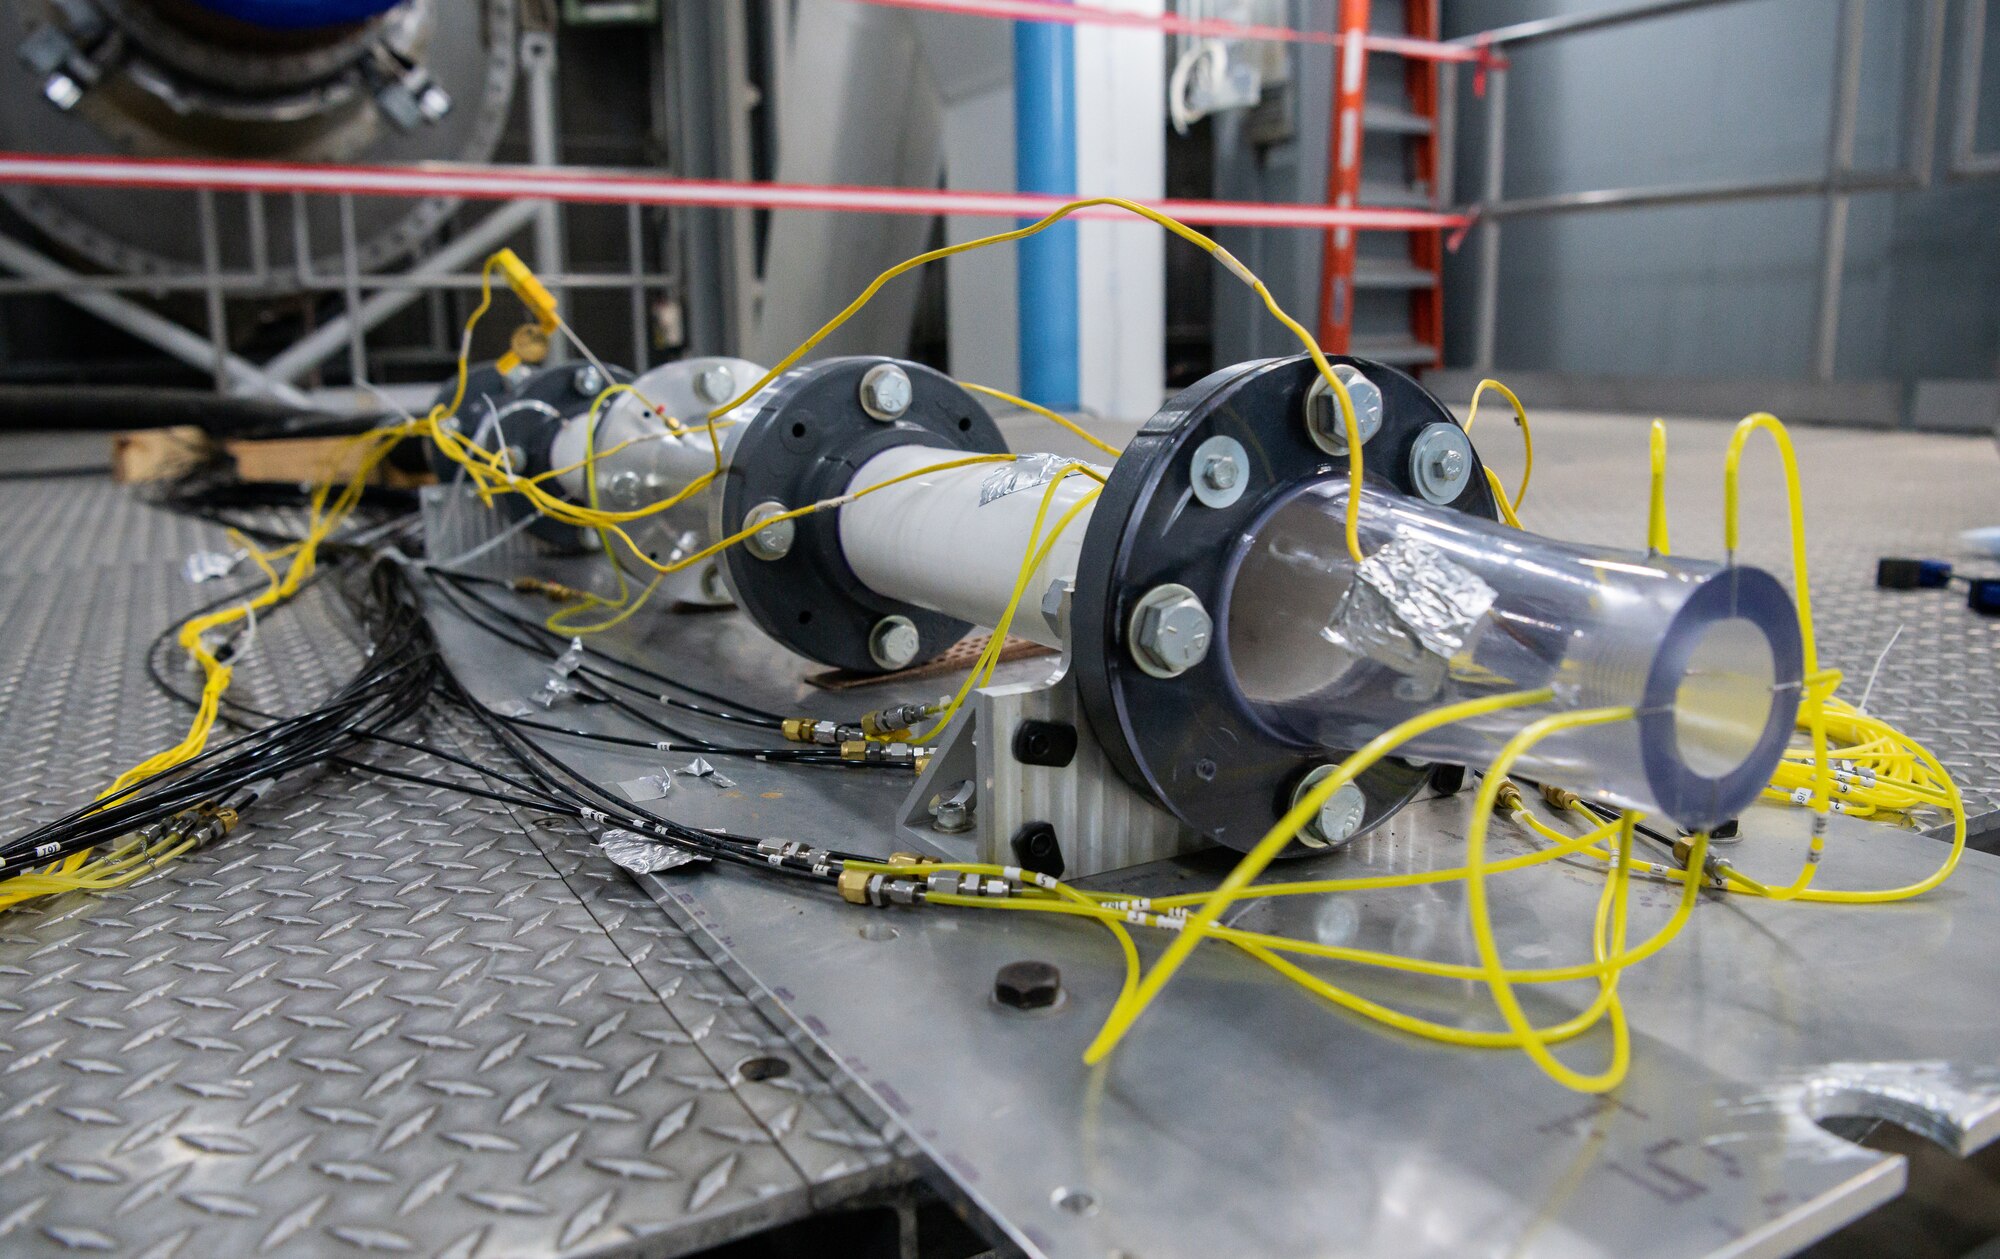 A nozzle is connected to a testing apparatus in a sea level turbine engine test cell at Arnold Air Force Base.